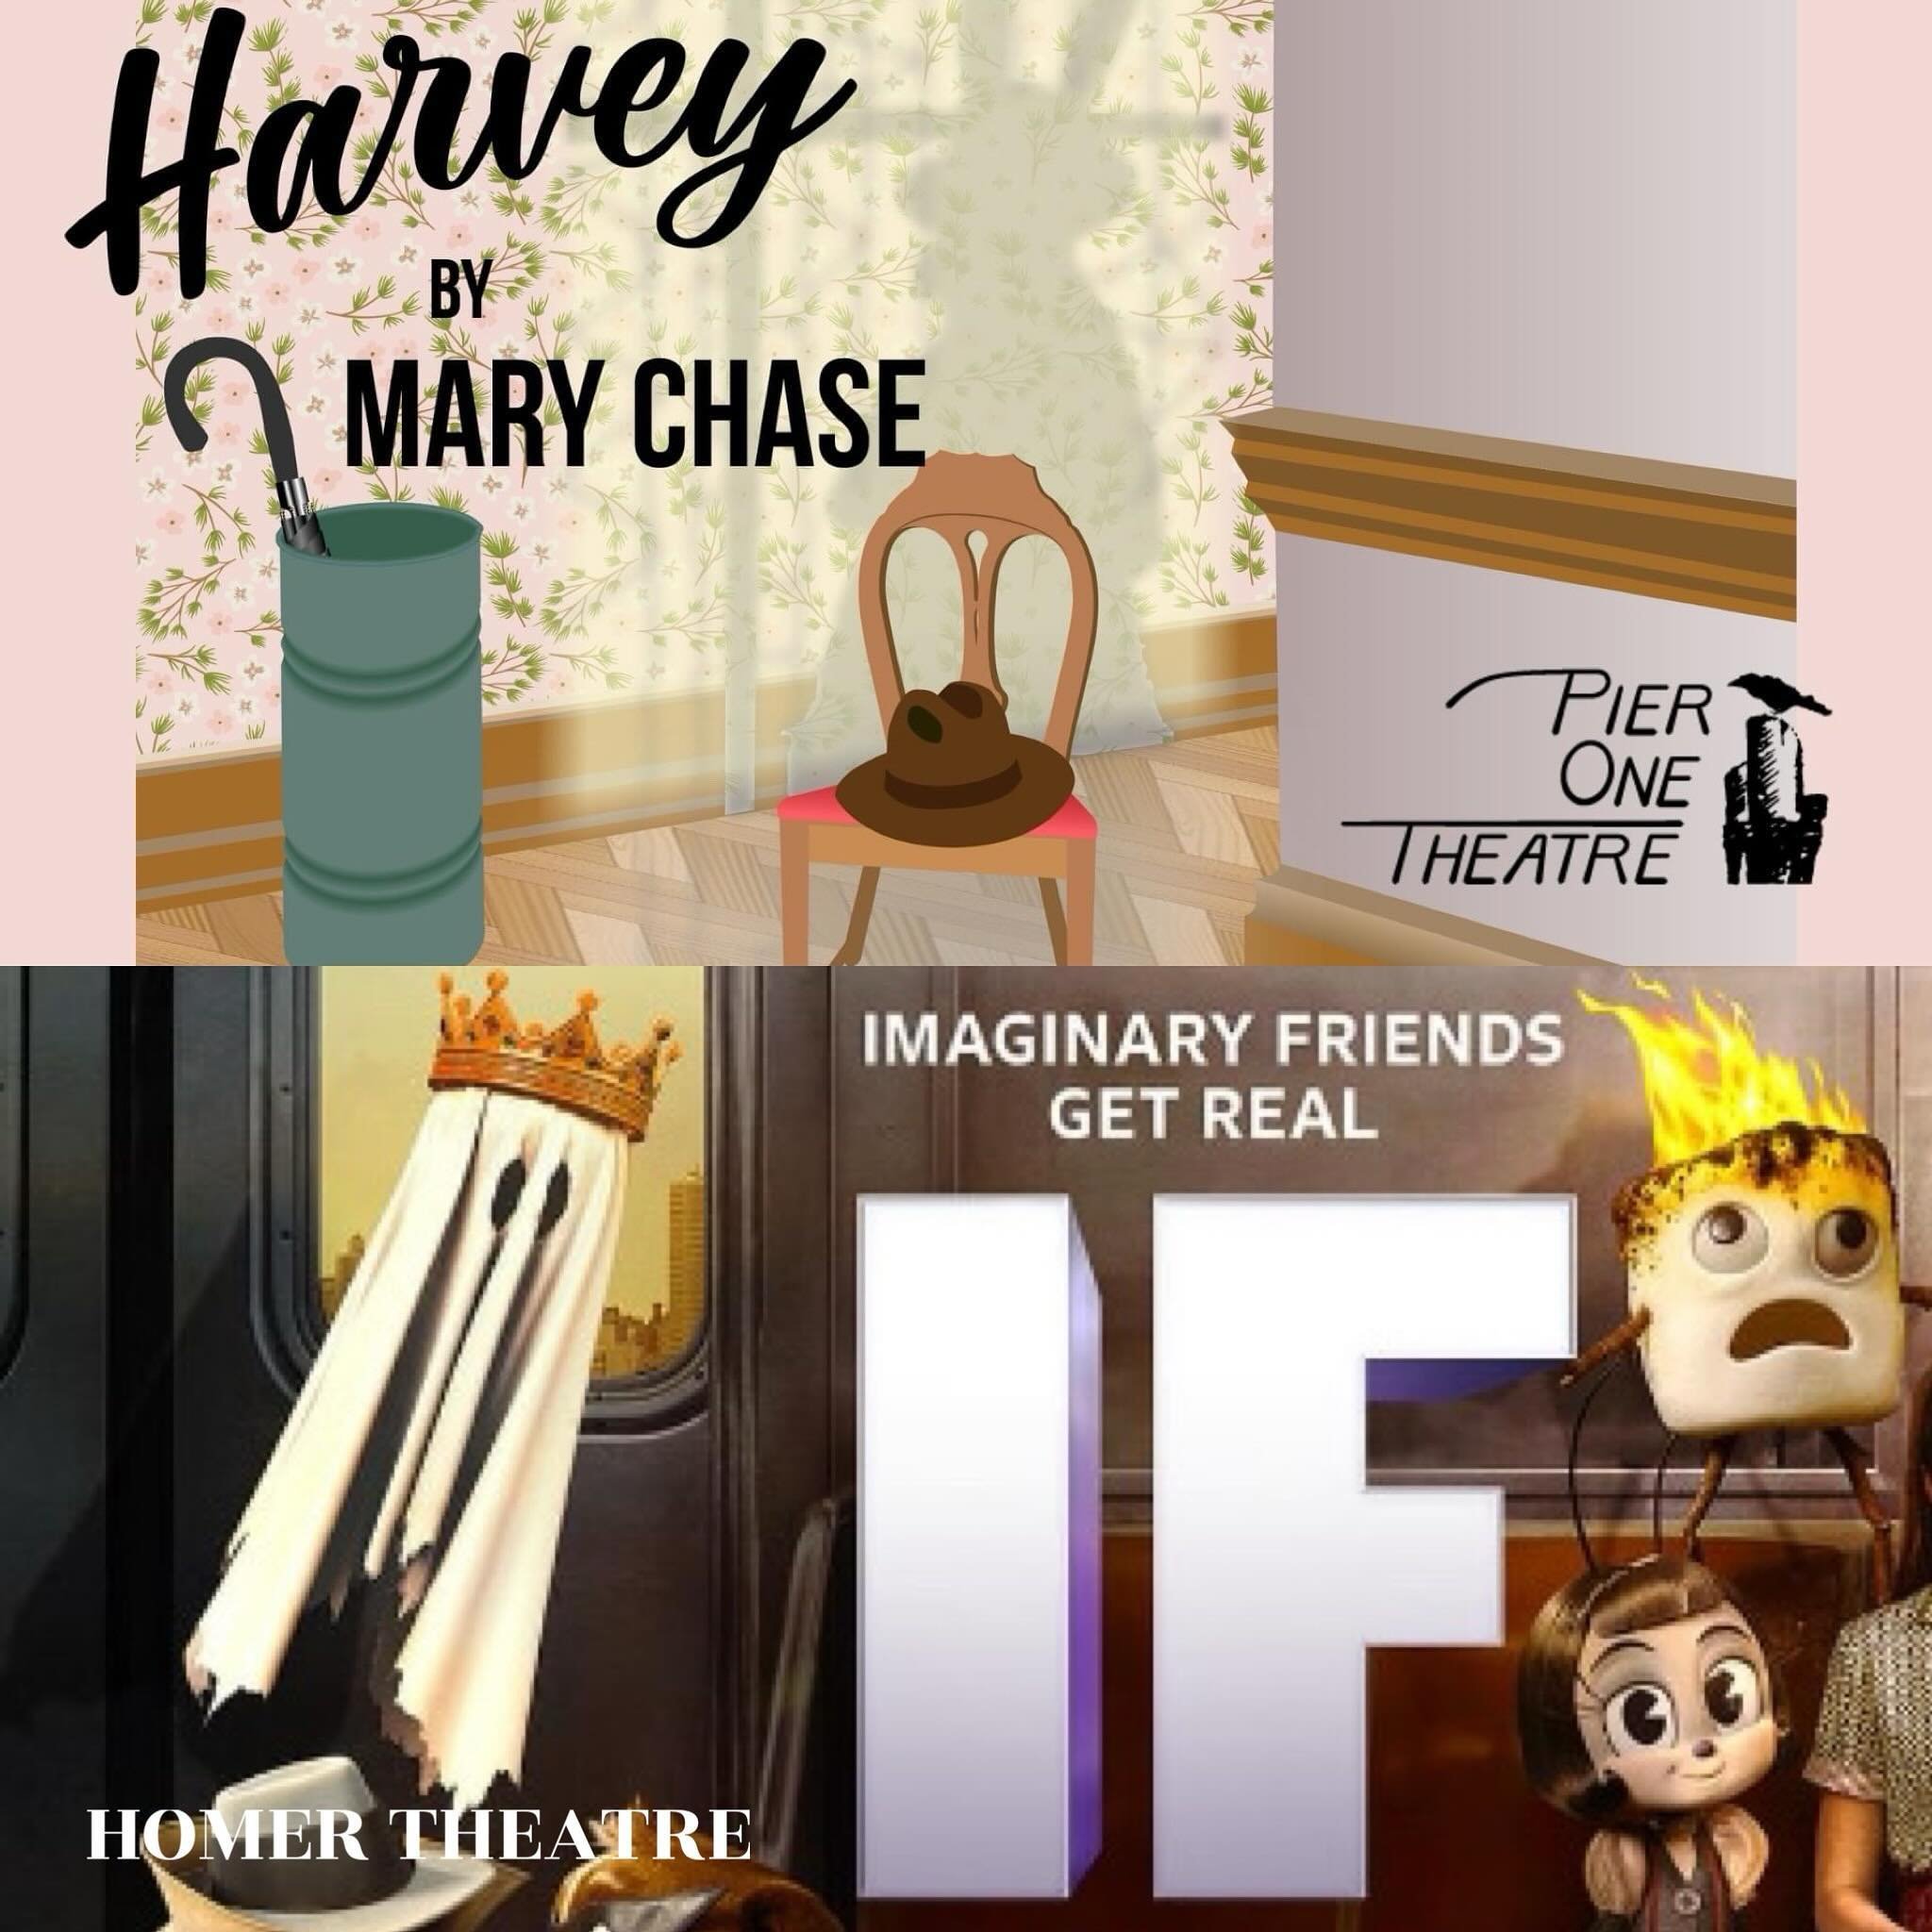 This weekend, take your imaginary friend to see a show! You can catch our production of Mary Chase&rsquo;s HARVEY at Pier One Theatre on the Spit AND you can see IF playing at the Homer Theatre @homertheatre ! 

Do you have an imaginary friend? Tell 